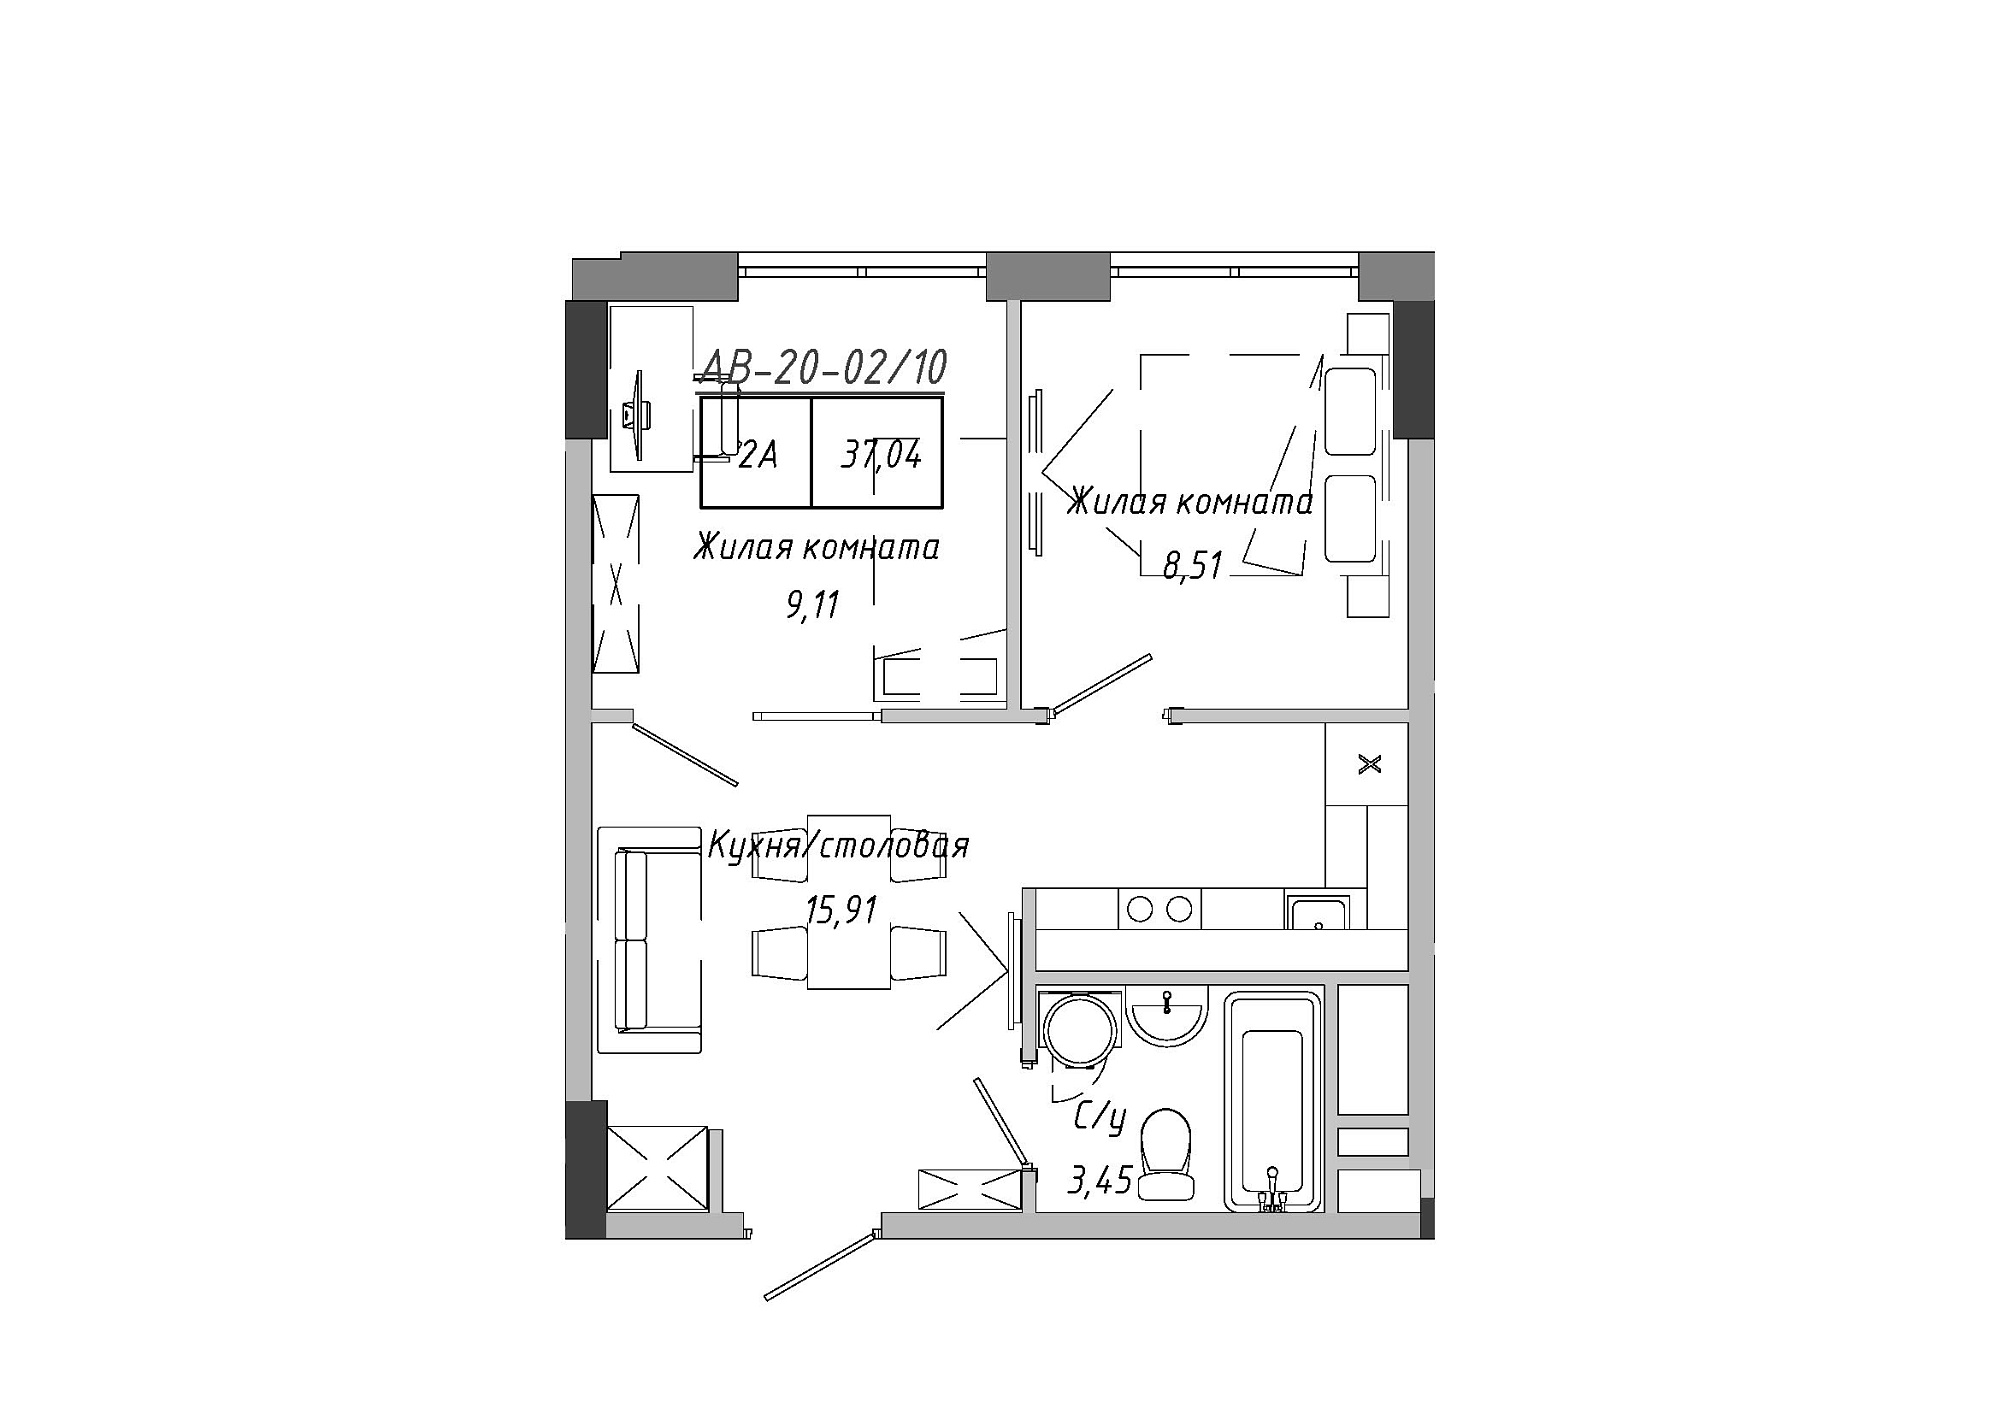 Planning 2-rm flats area 37.15m2, AB-20-02/00010.